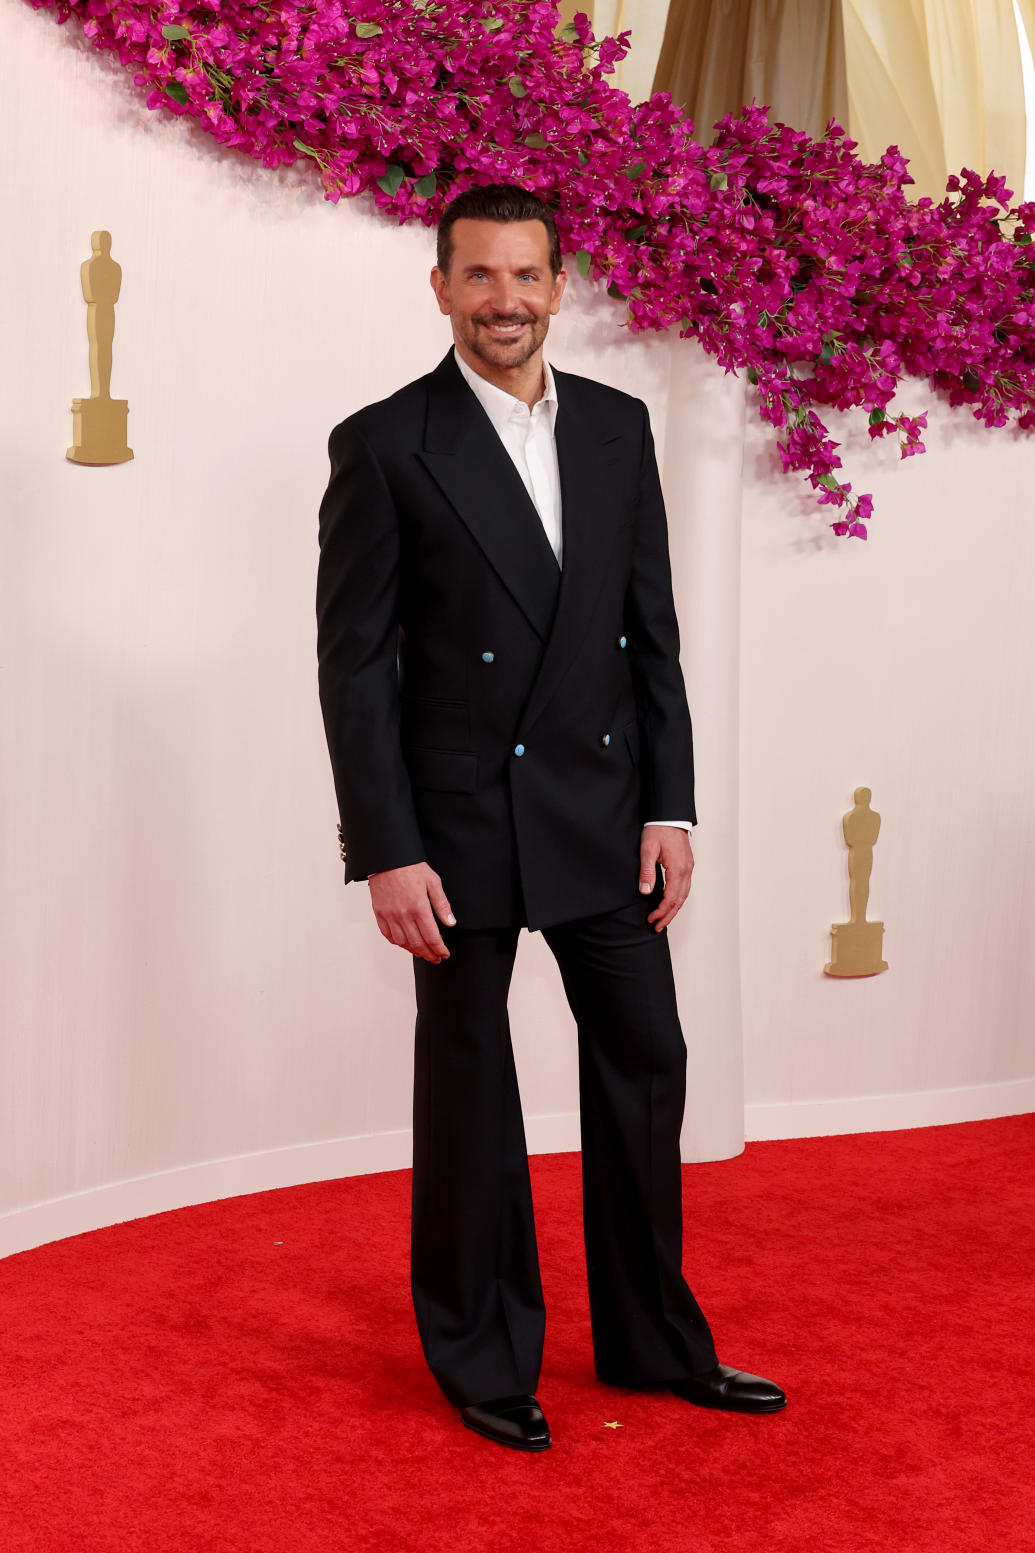 Bradley Cooper at the Oscars 